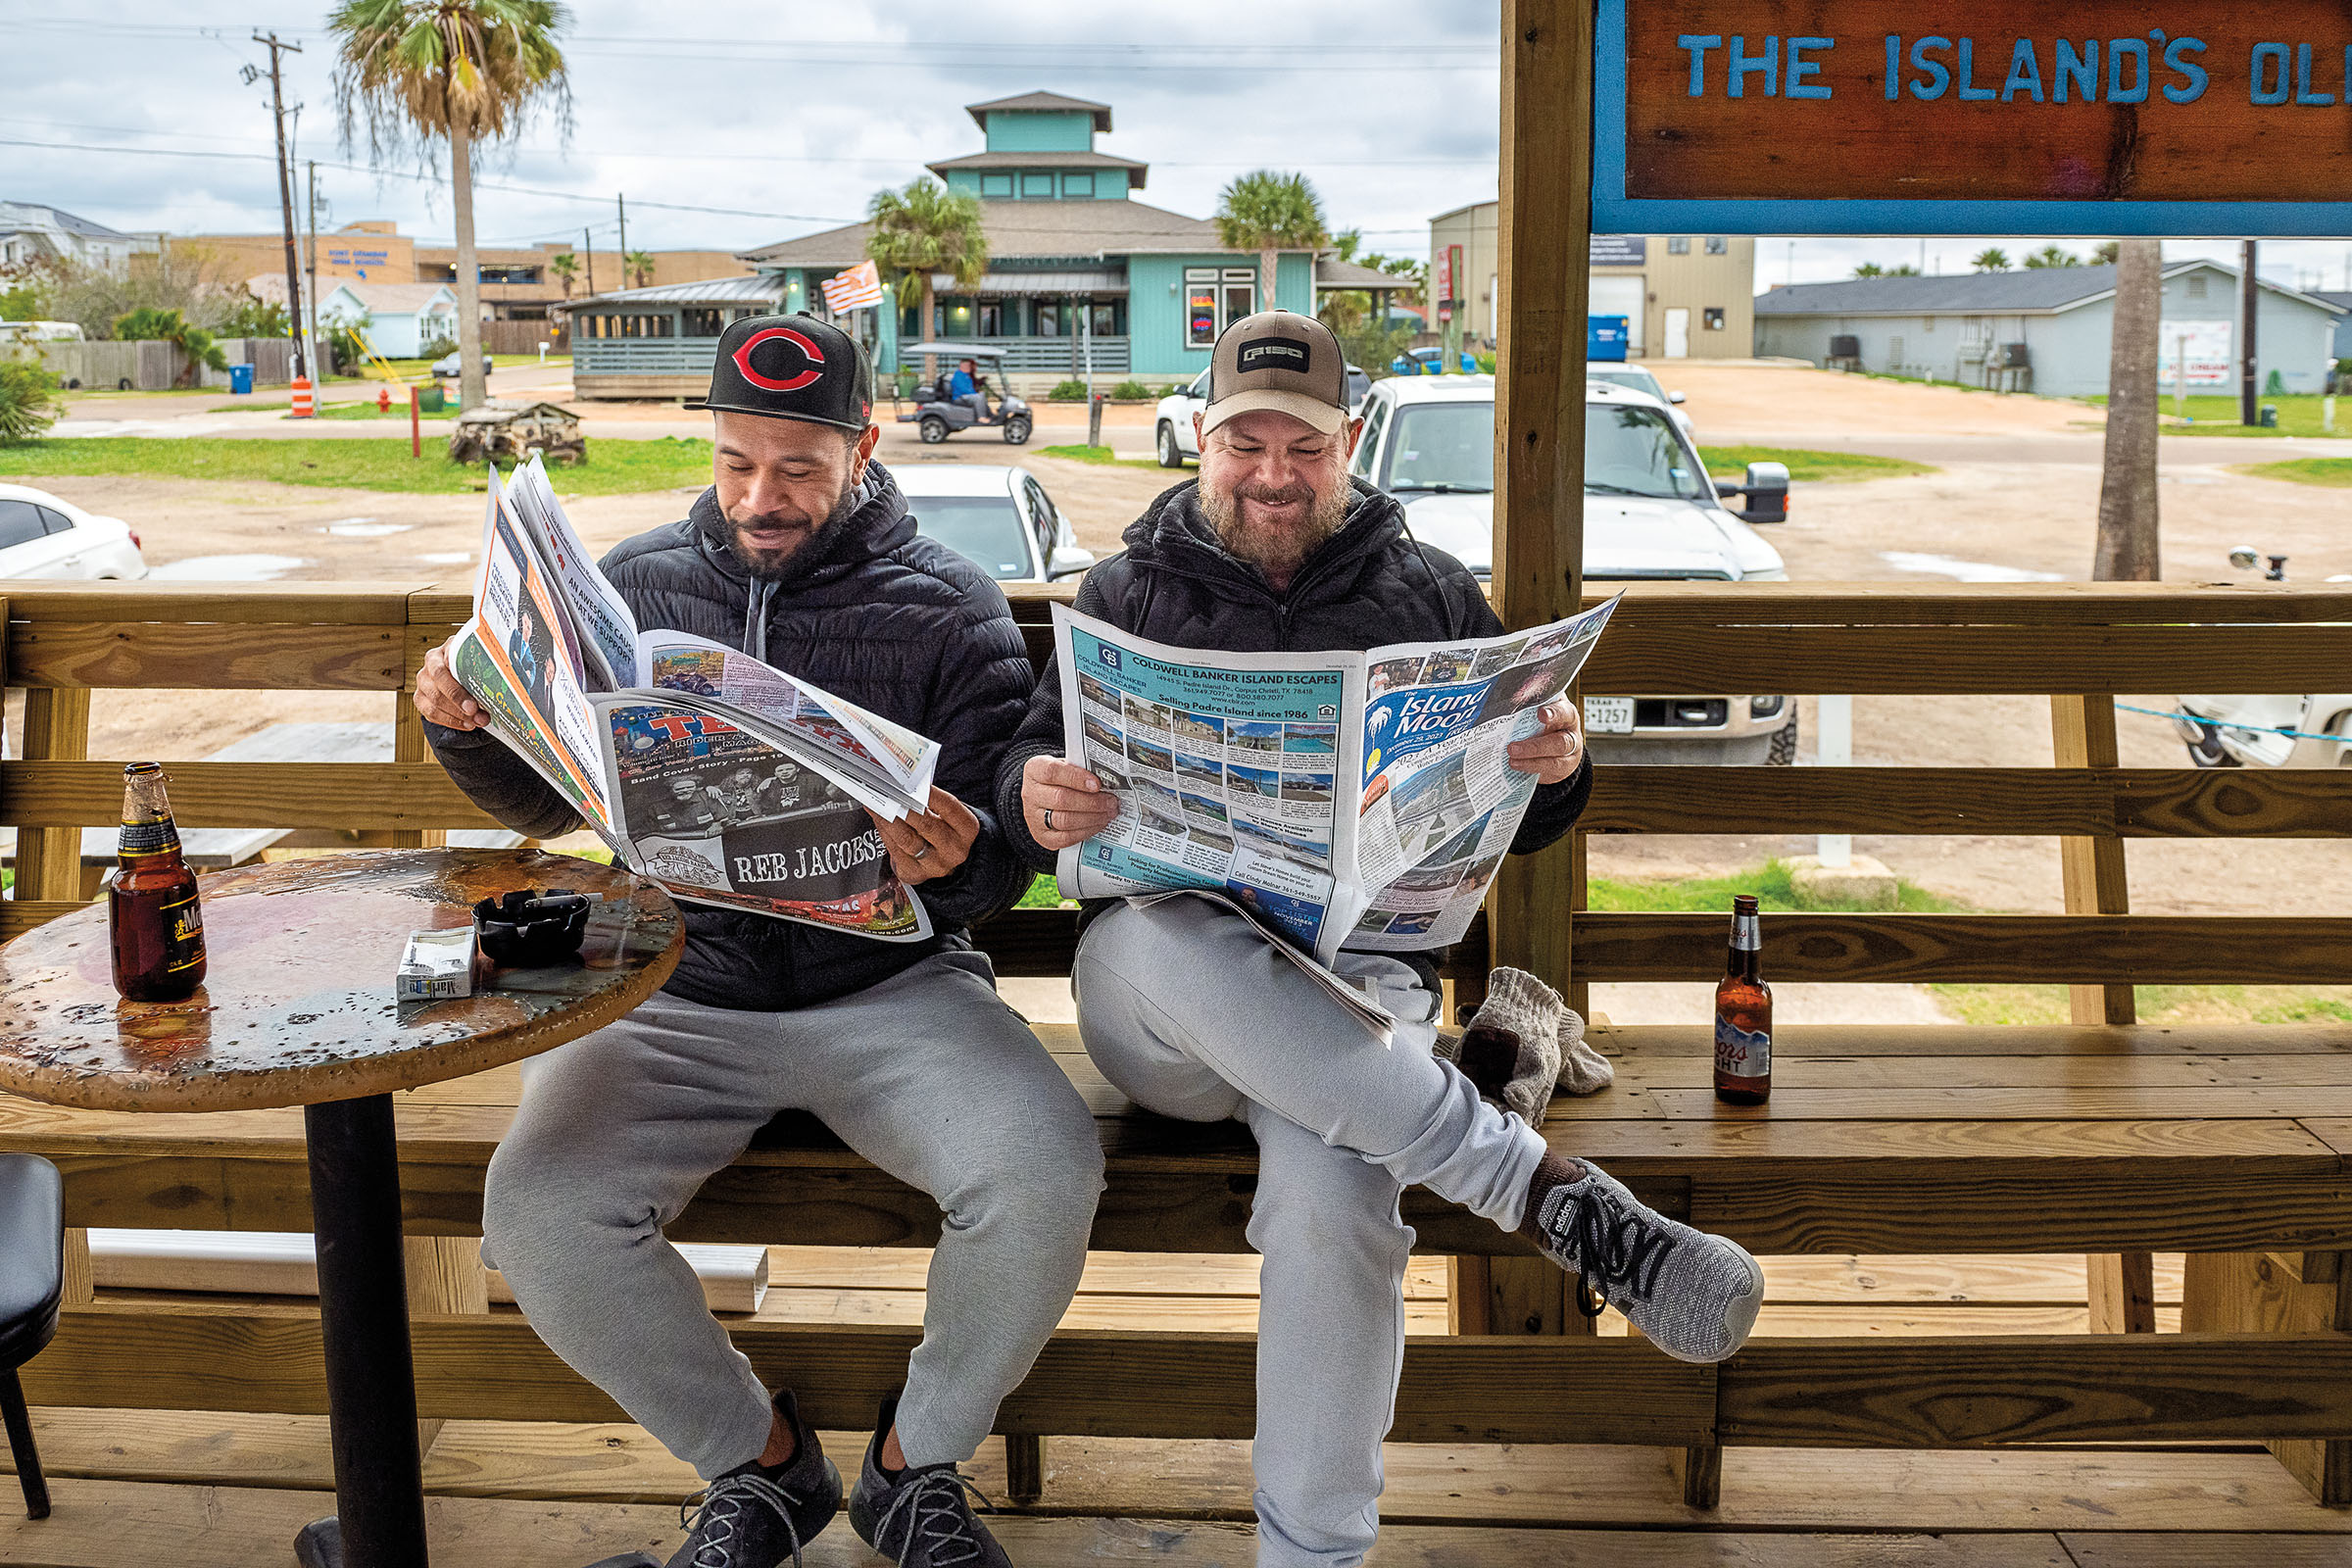 Two men sit on a wooden bench reading newspapers